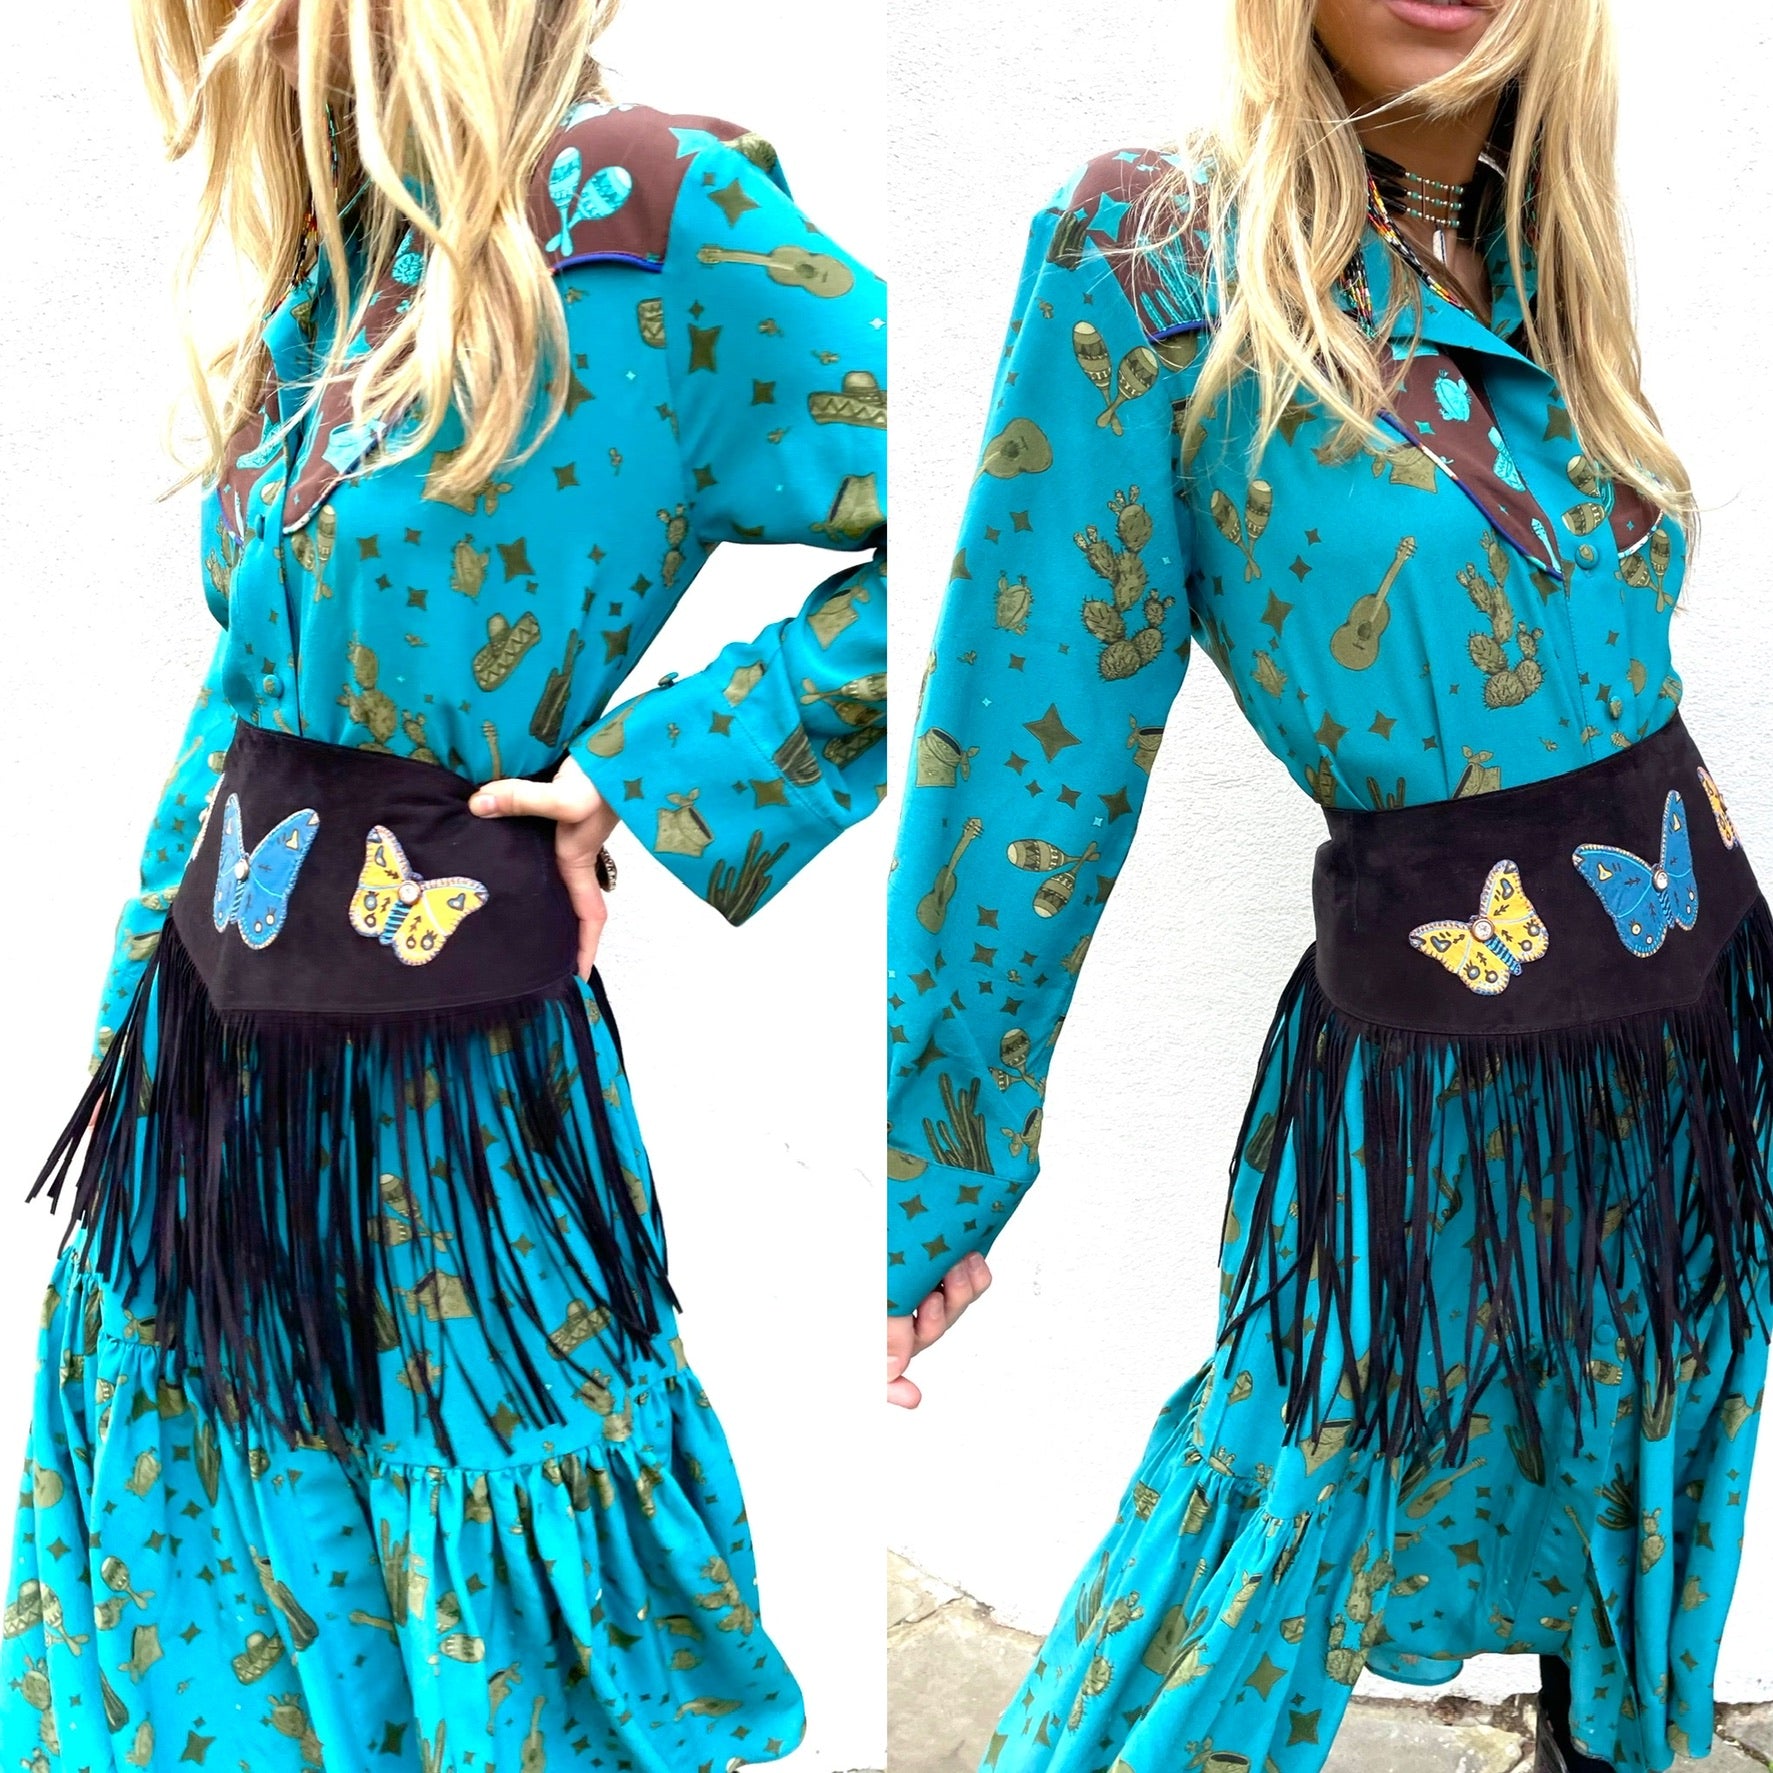 Butterfly fringed belt limited edition Jessie Western brand